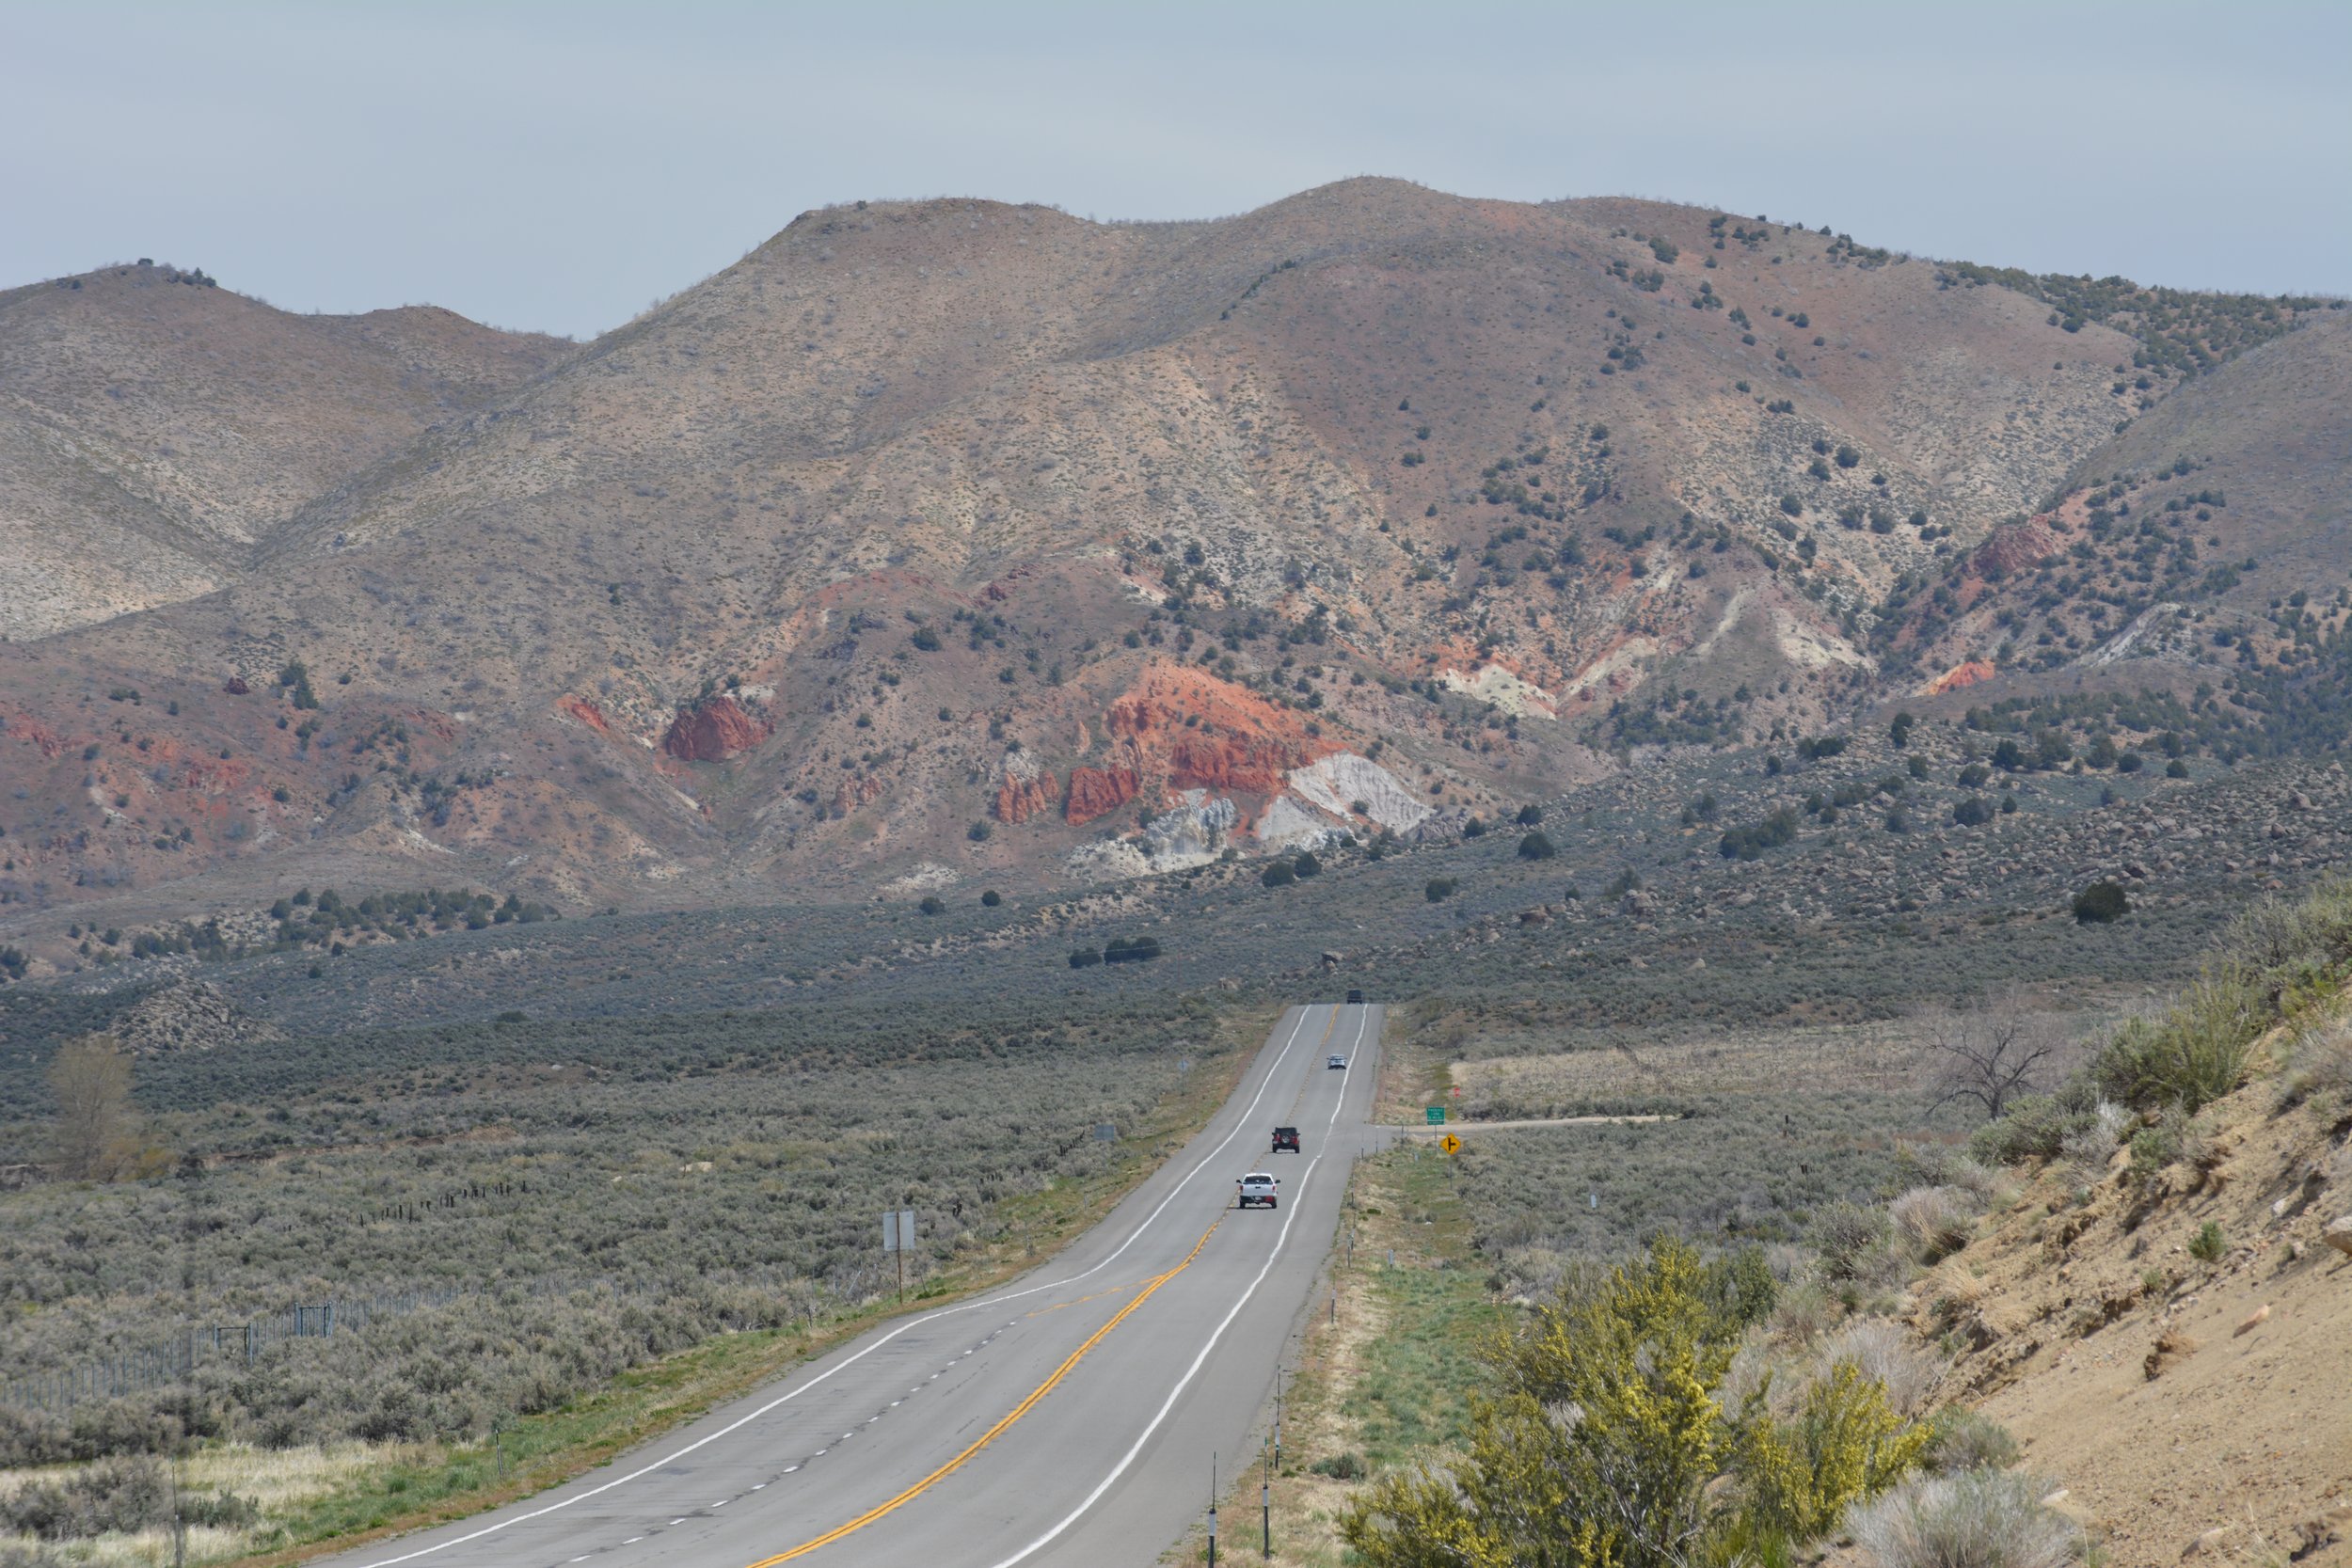  Our Highway 395 study will inform what enhancements are needed to allow safe passage for wildlife and reconnect the Sierra Nevada to the west to the low-lying sagebrush to the east. 